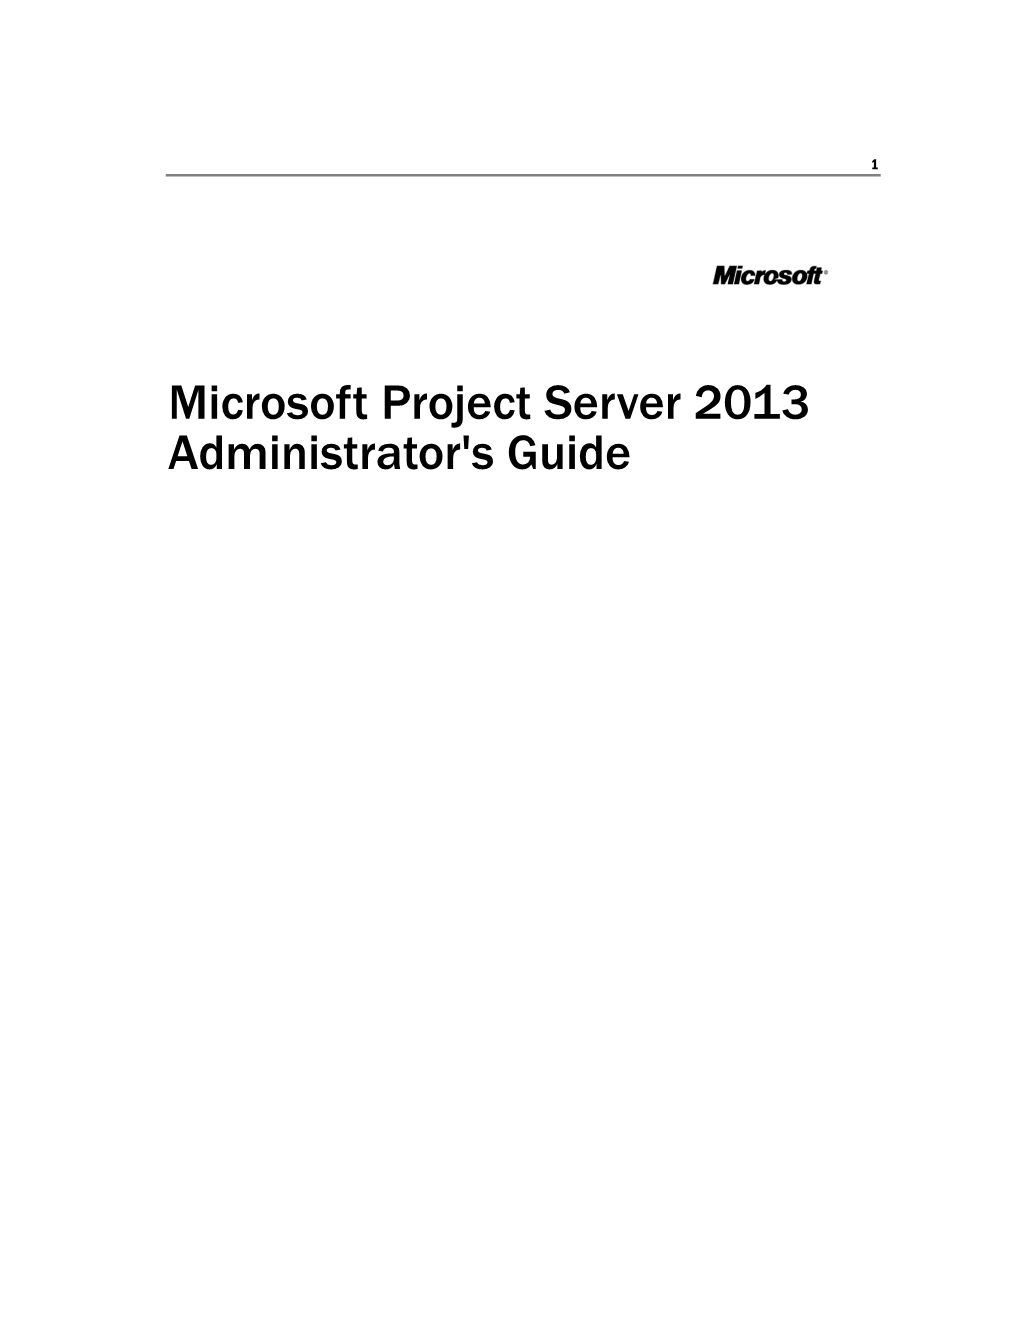 Microsoft Project Server 2013 Administrator's Guide